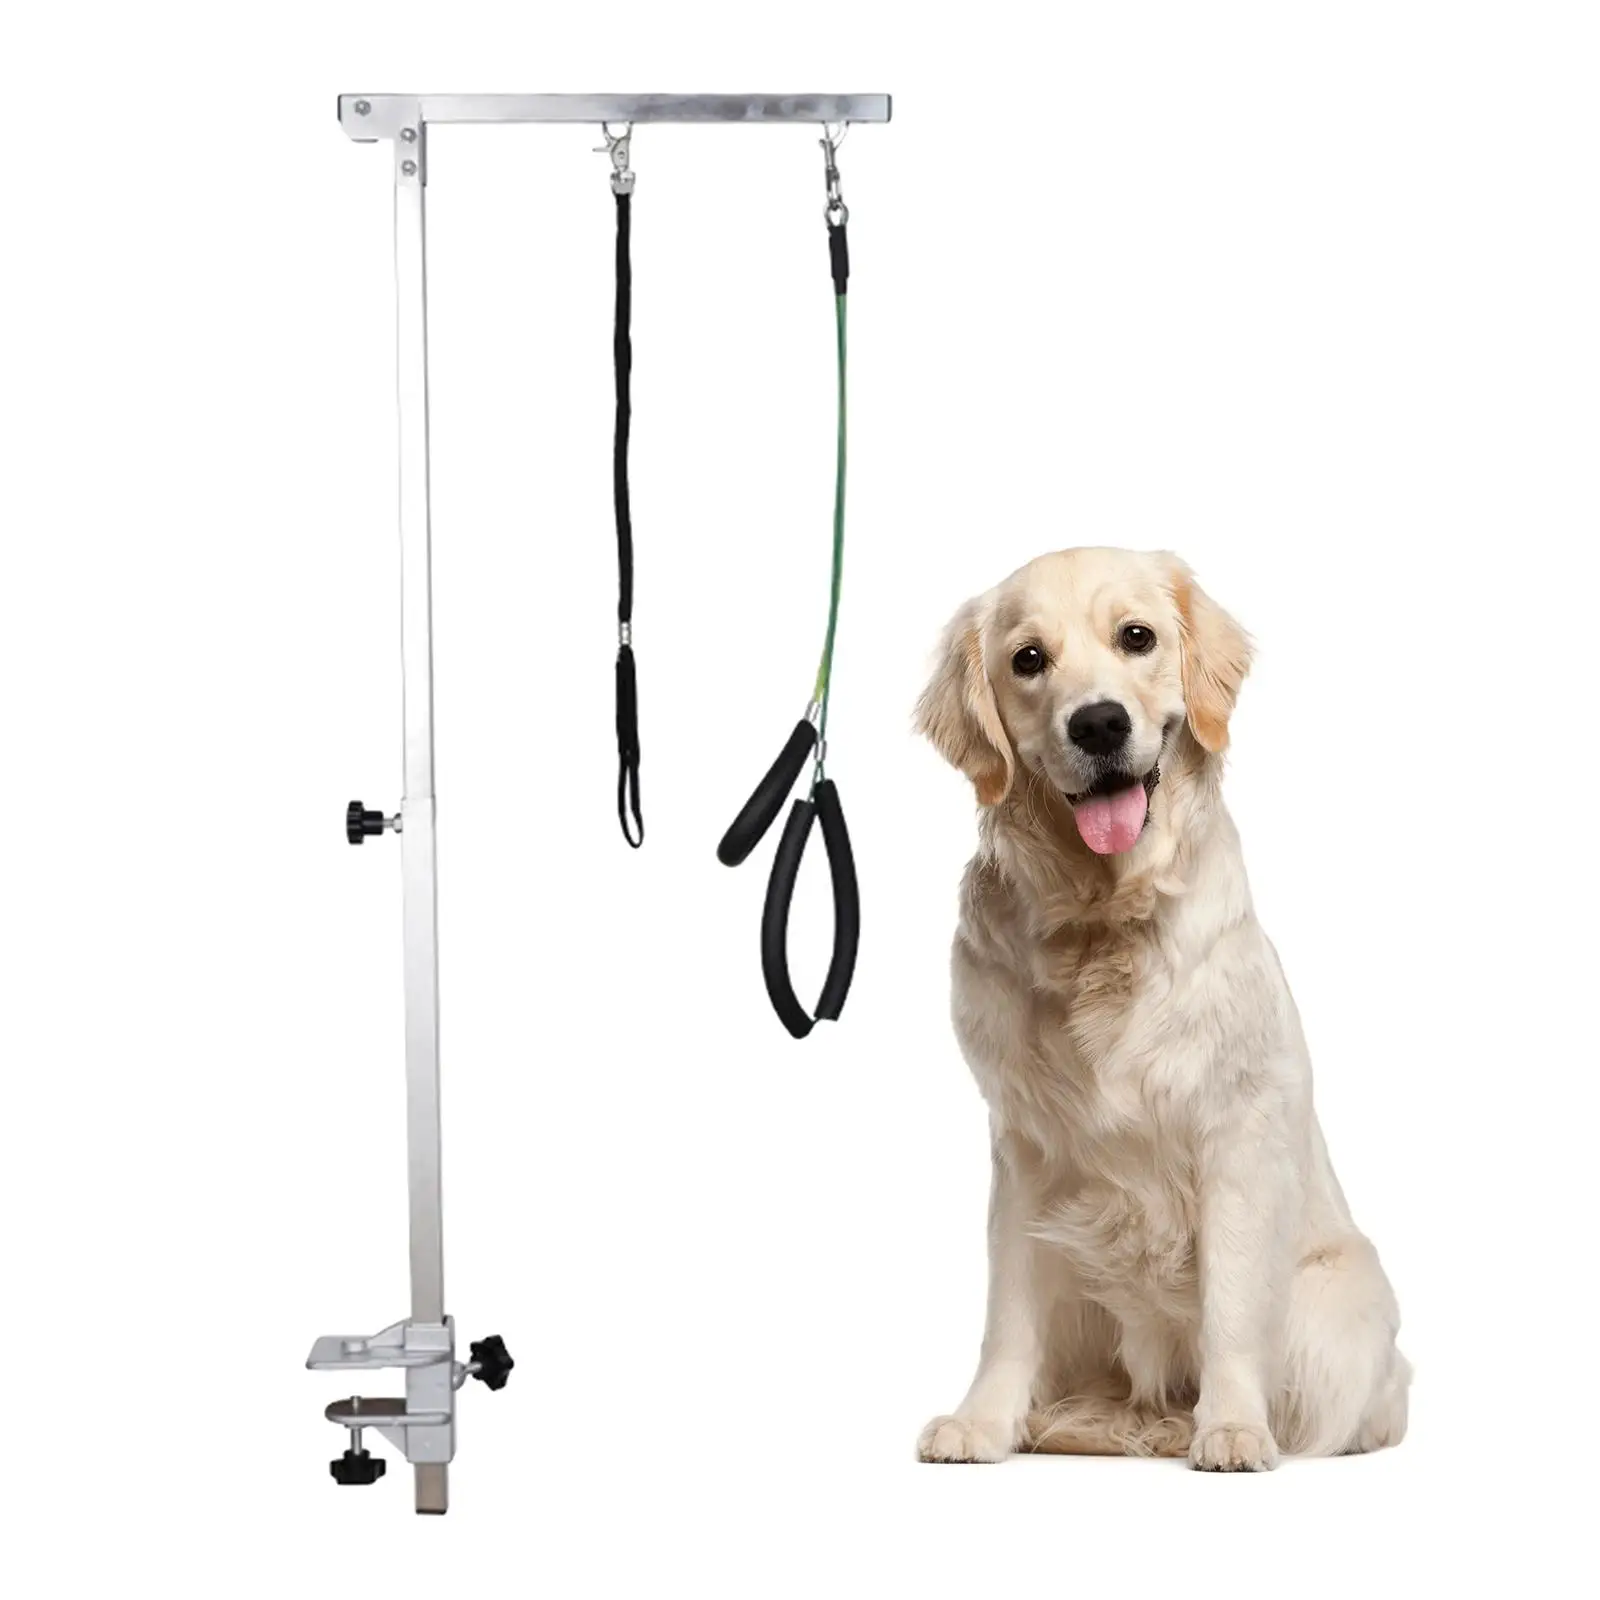 Grooming Table Bracket Pet Dog Grooming Table Bracket Arm Adjustable with Clamps Portable